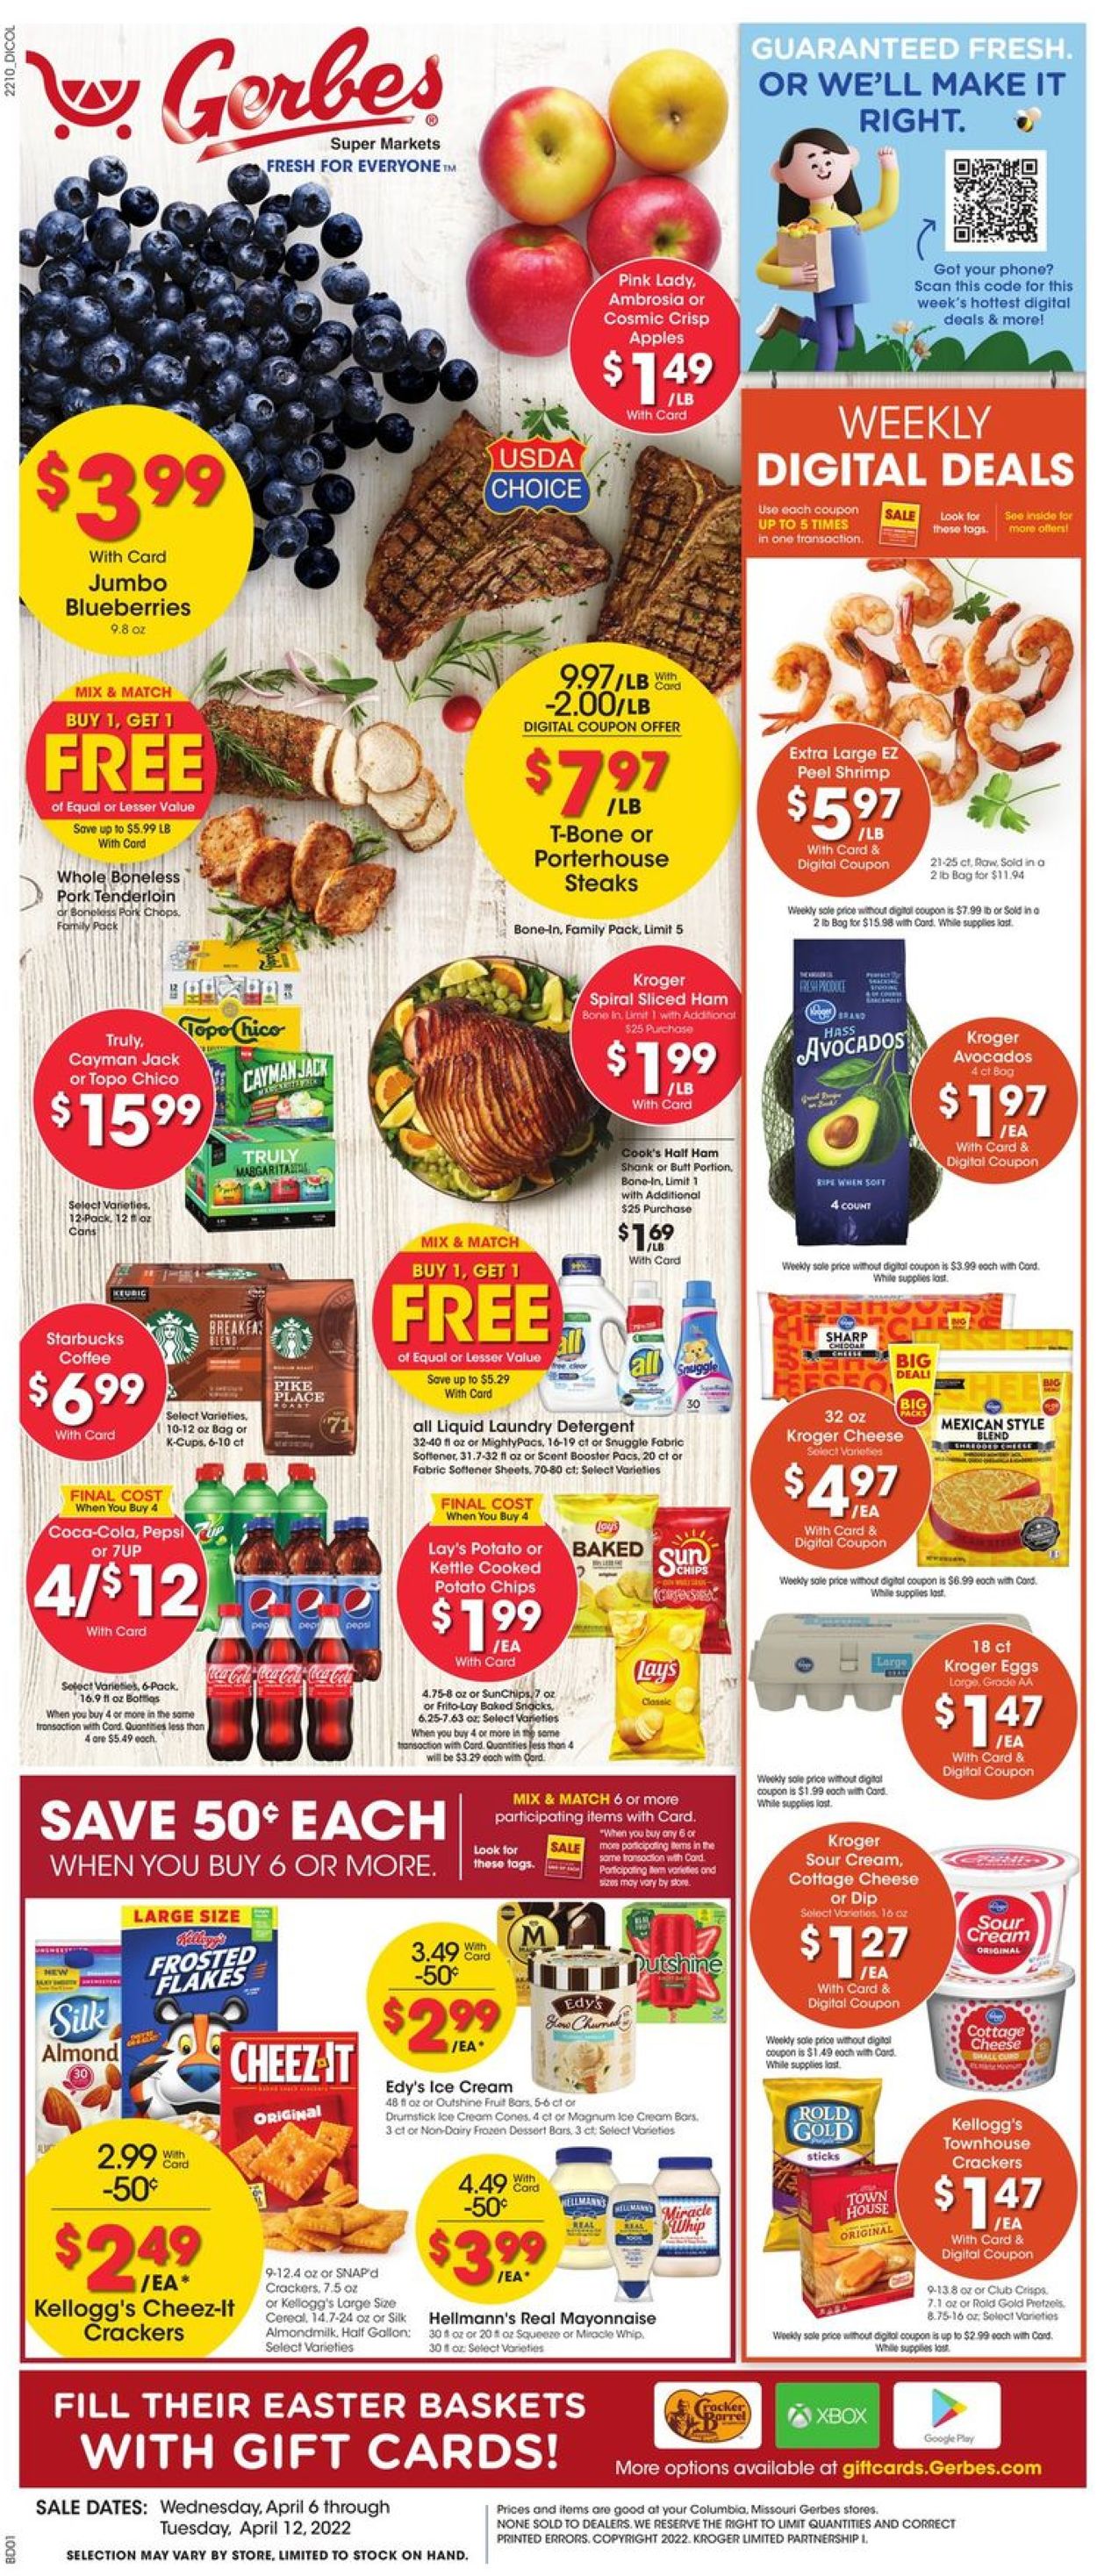 Gerbes Super Markets EASTER 2022 Current weekly ad 04/06 - 04/12/2022